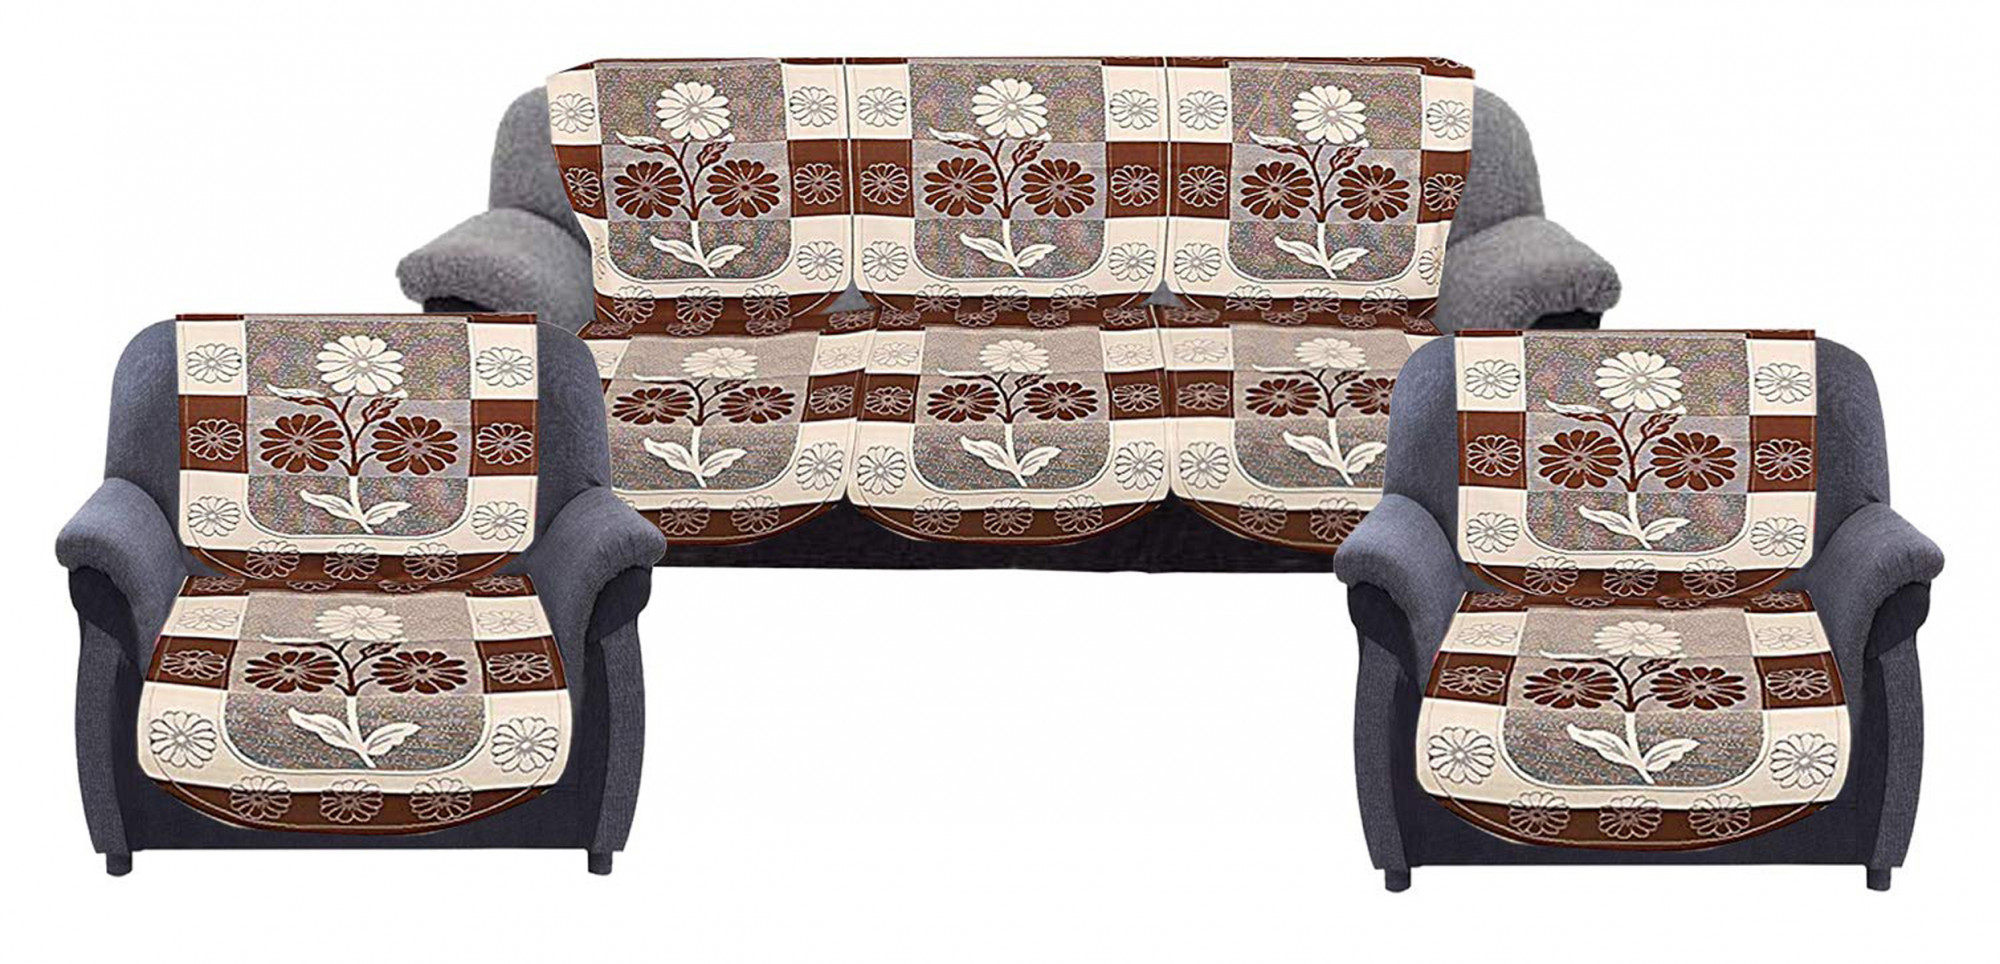 Kuber Industries Flower Print Cotton 6 Piece 5 Seater Slip Cover/Sofa Cover Set,Brown